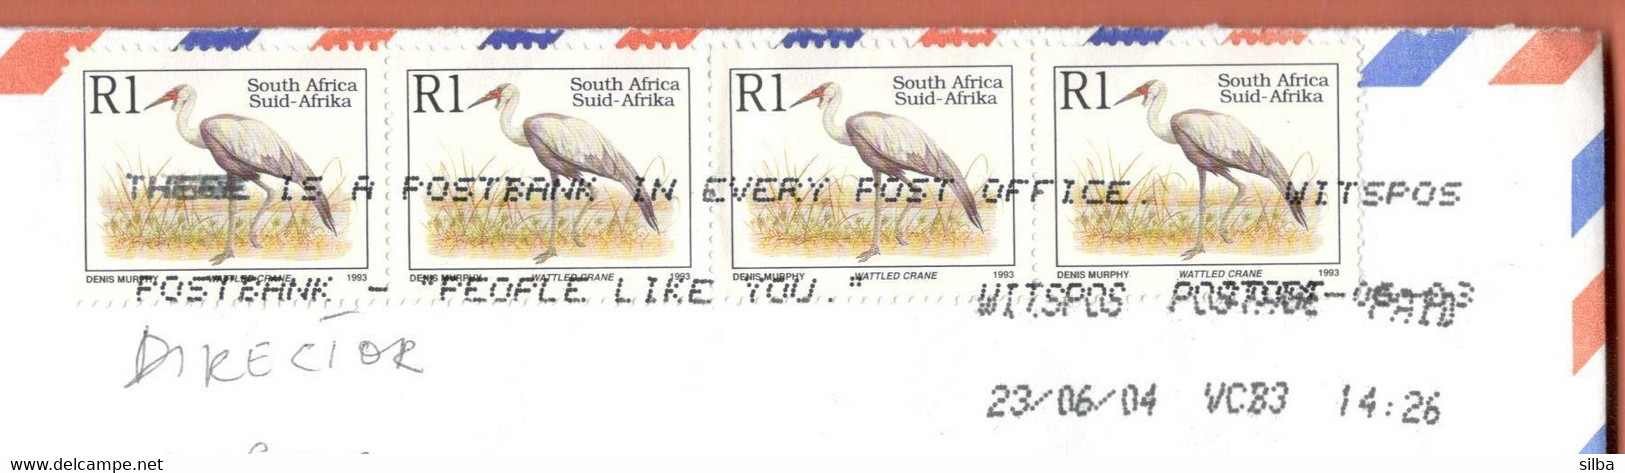 South Africa Witspos 2004 / There Is A Postbank In Every Post Office / Machine Stamp Slogan / Bird Wattled Crane 1993 - Briefe U. Dokumente